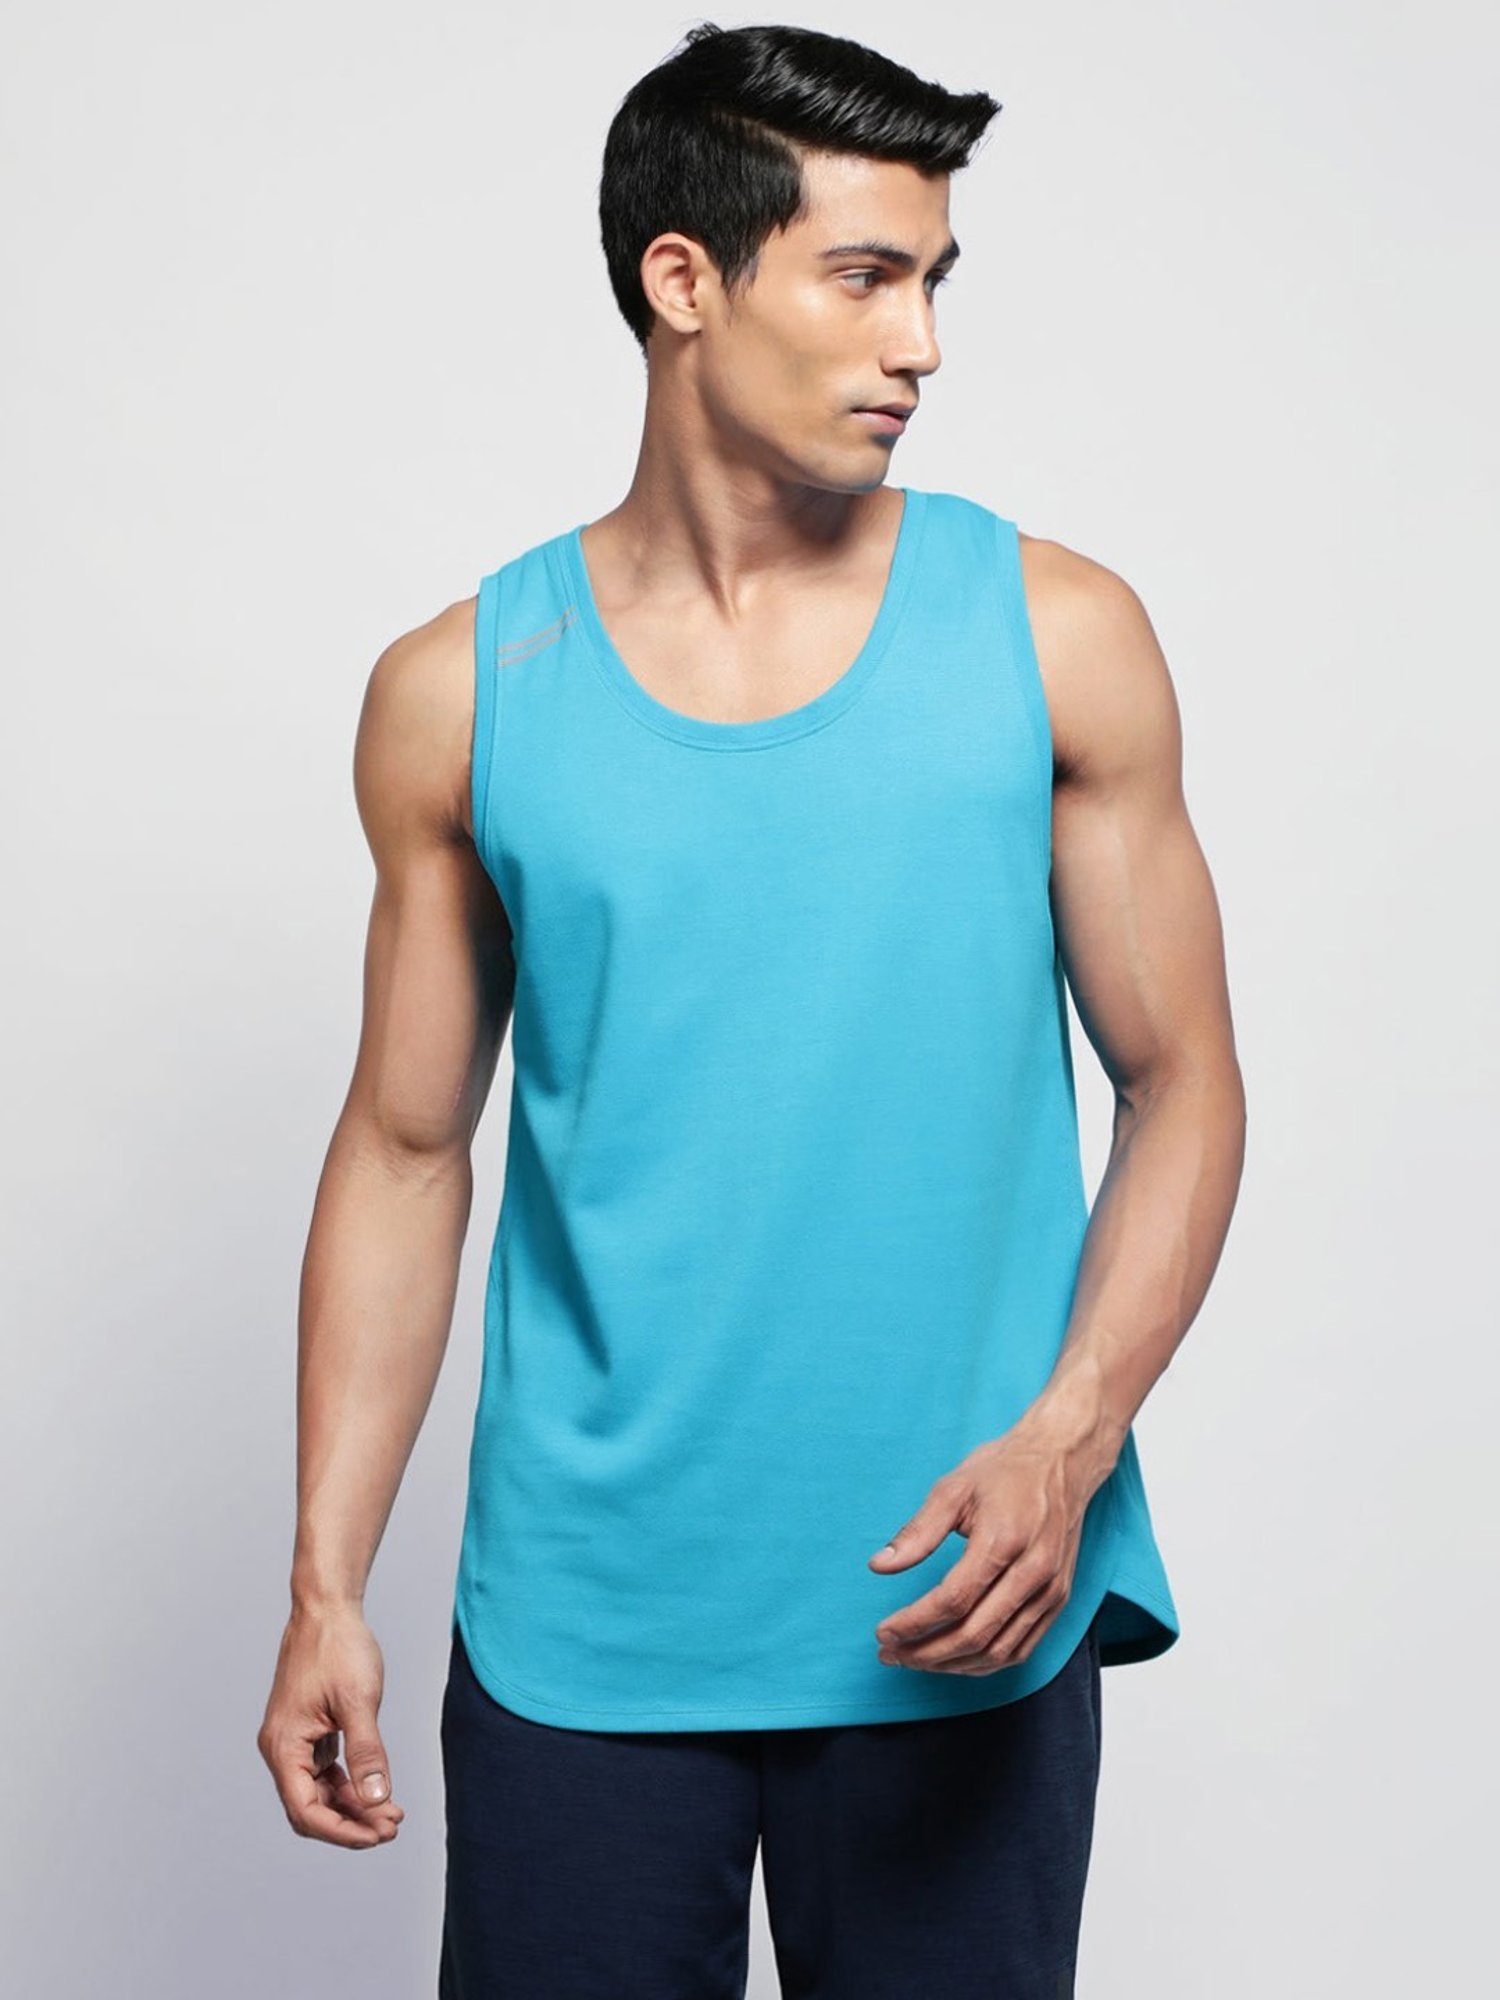 Men's Super Combed Cotton Blend Breathable Mesh Sleeveless Muscle Tee with  Stay Fresh Treatment - White